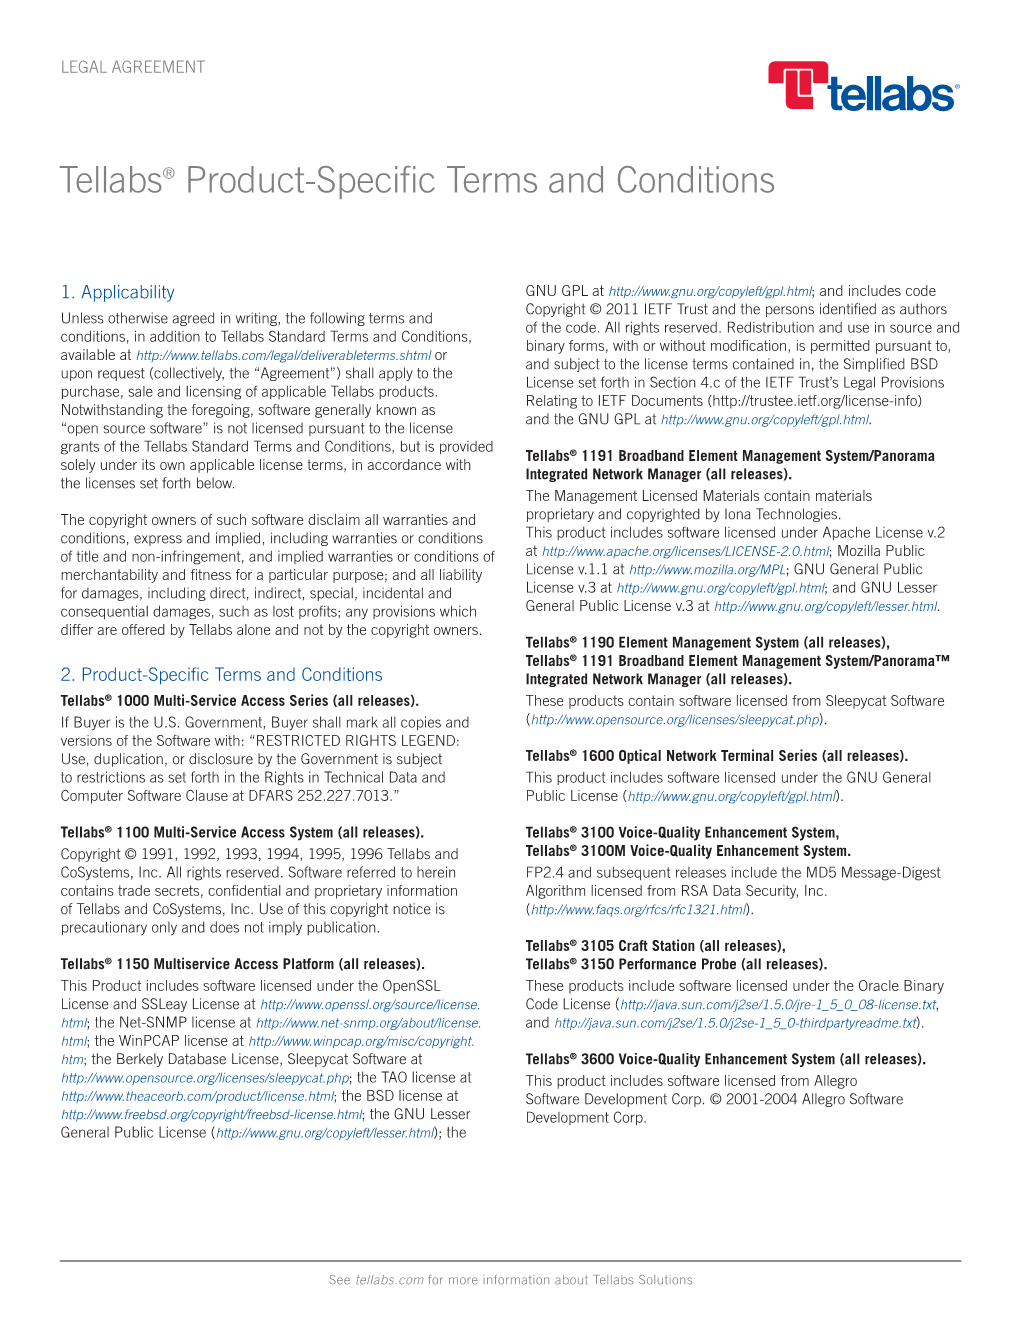 Tellabs Product-Specific Terms and Conditions